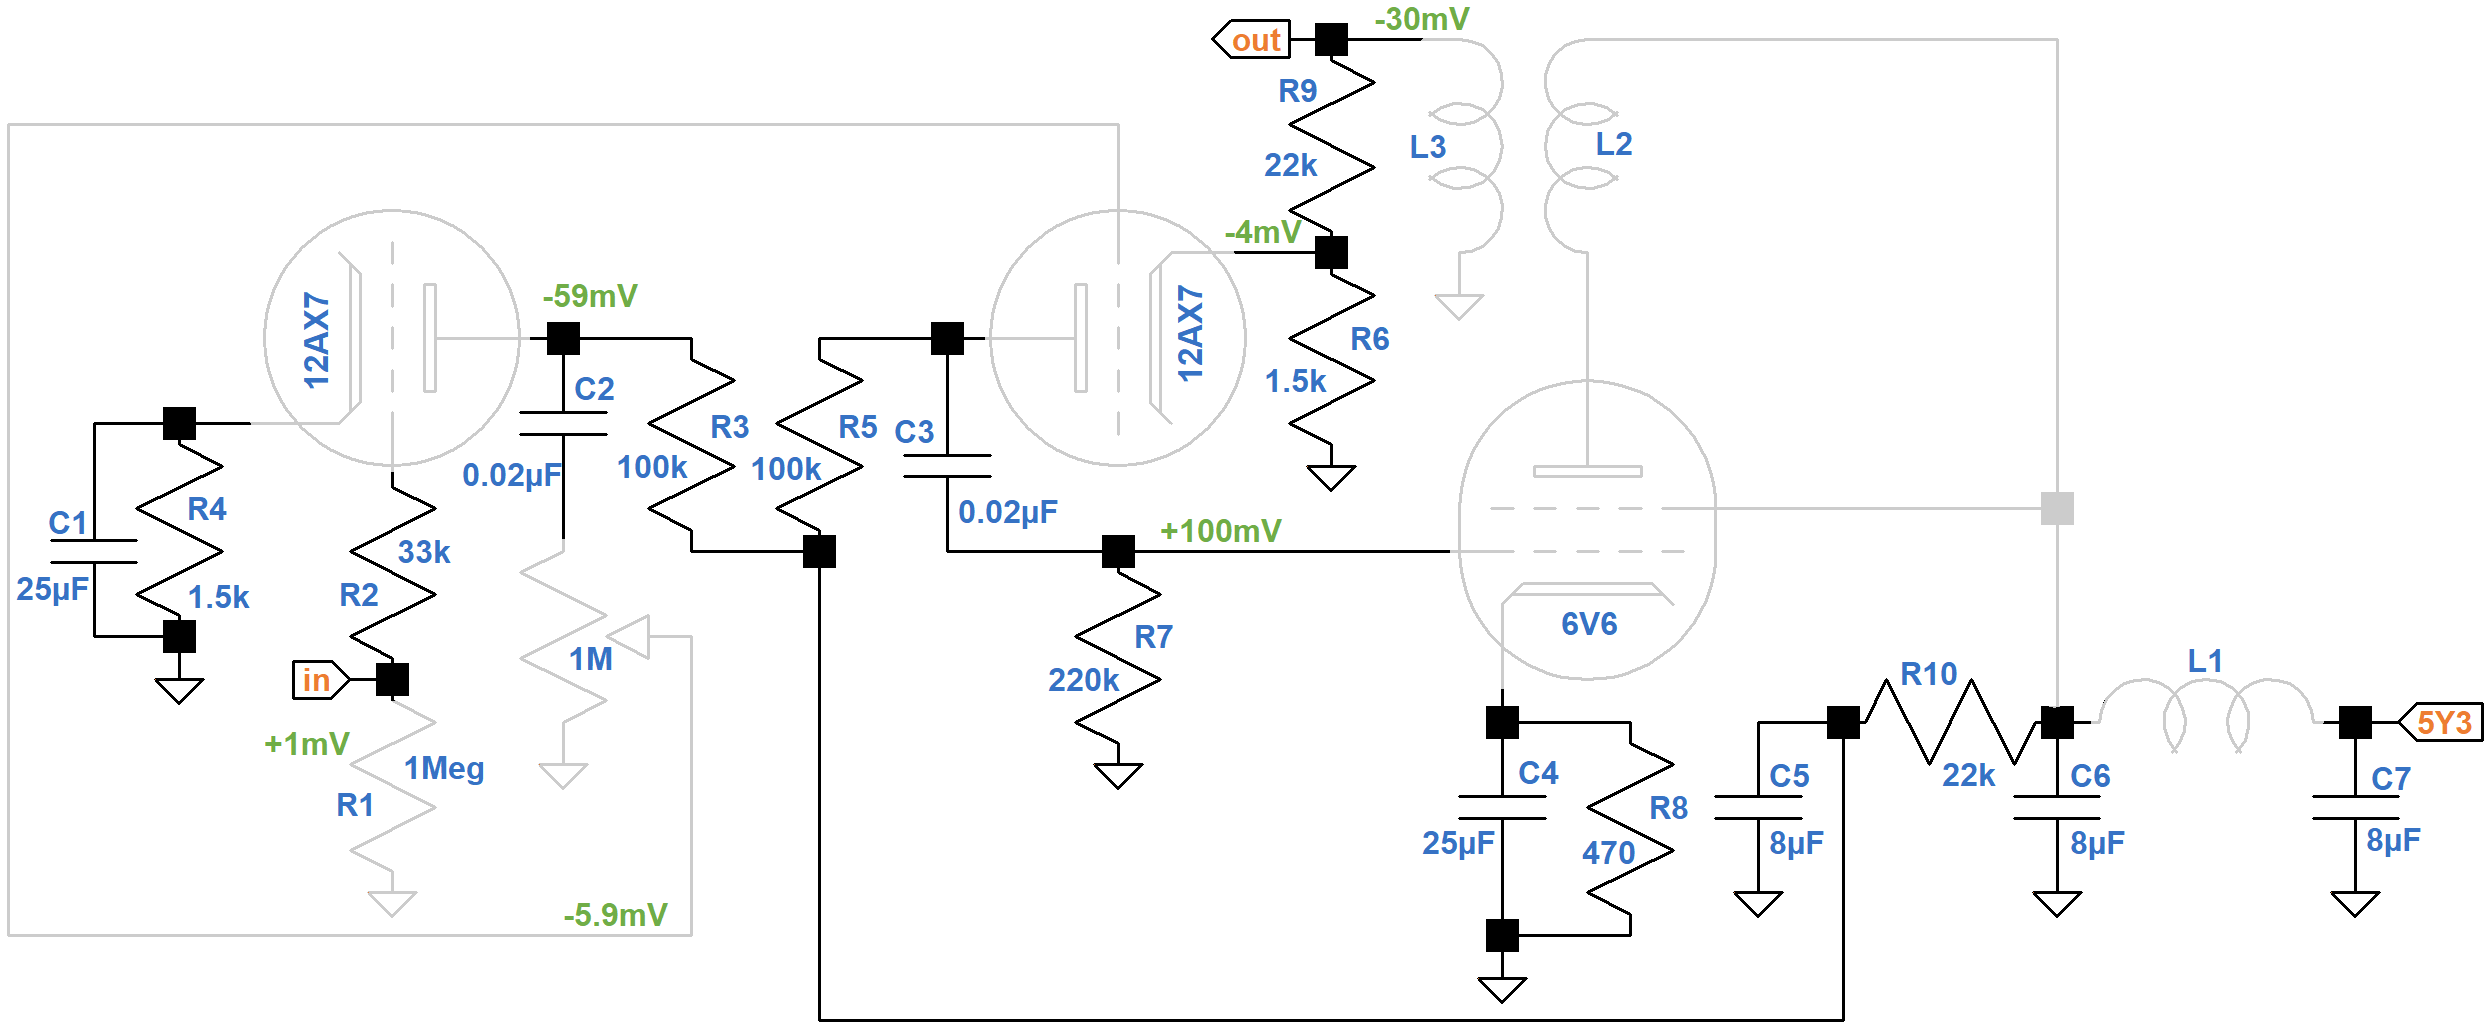 Fender Champ 5E1 schematic rearranged with signal level annotations